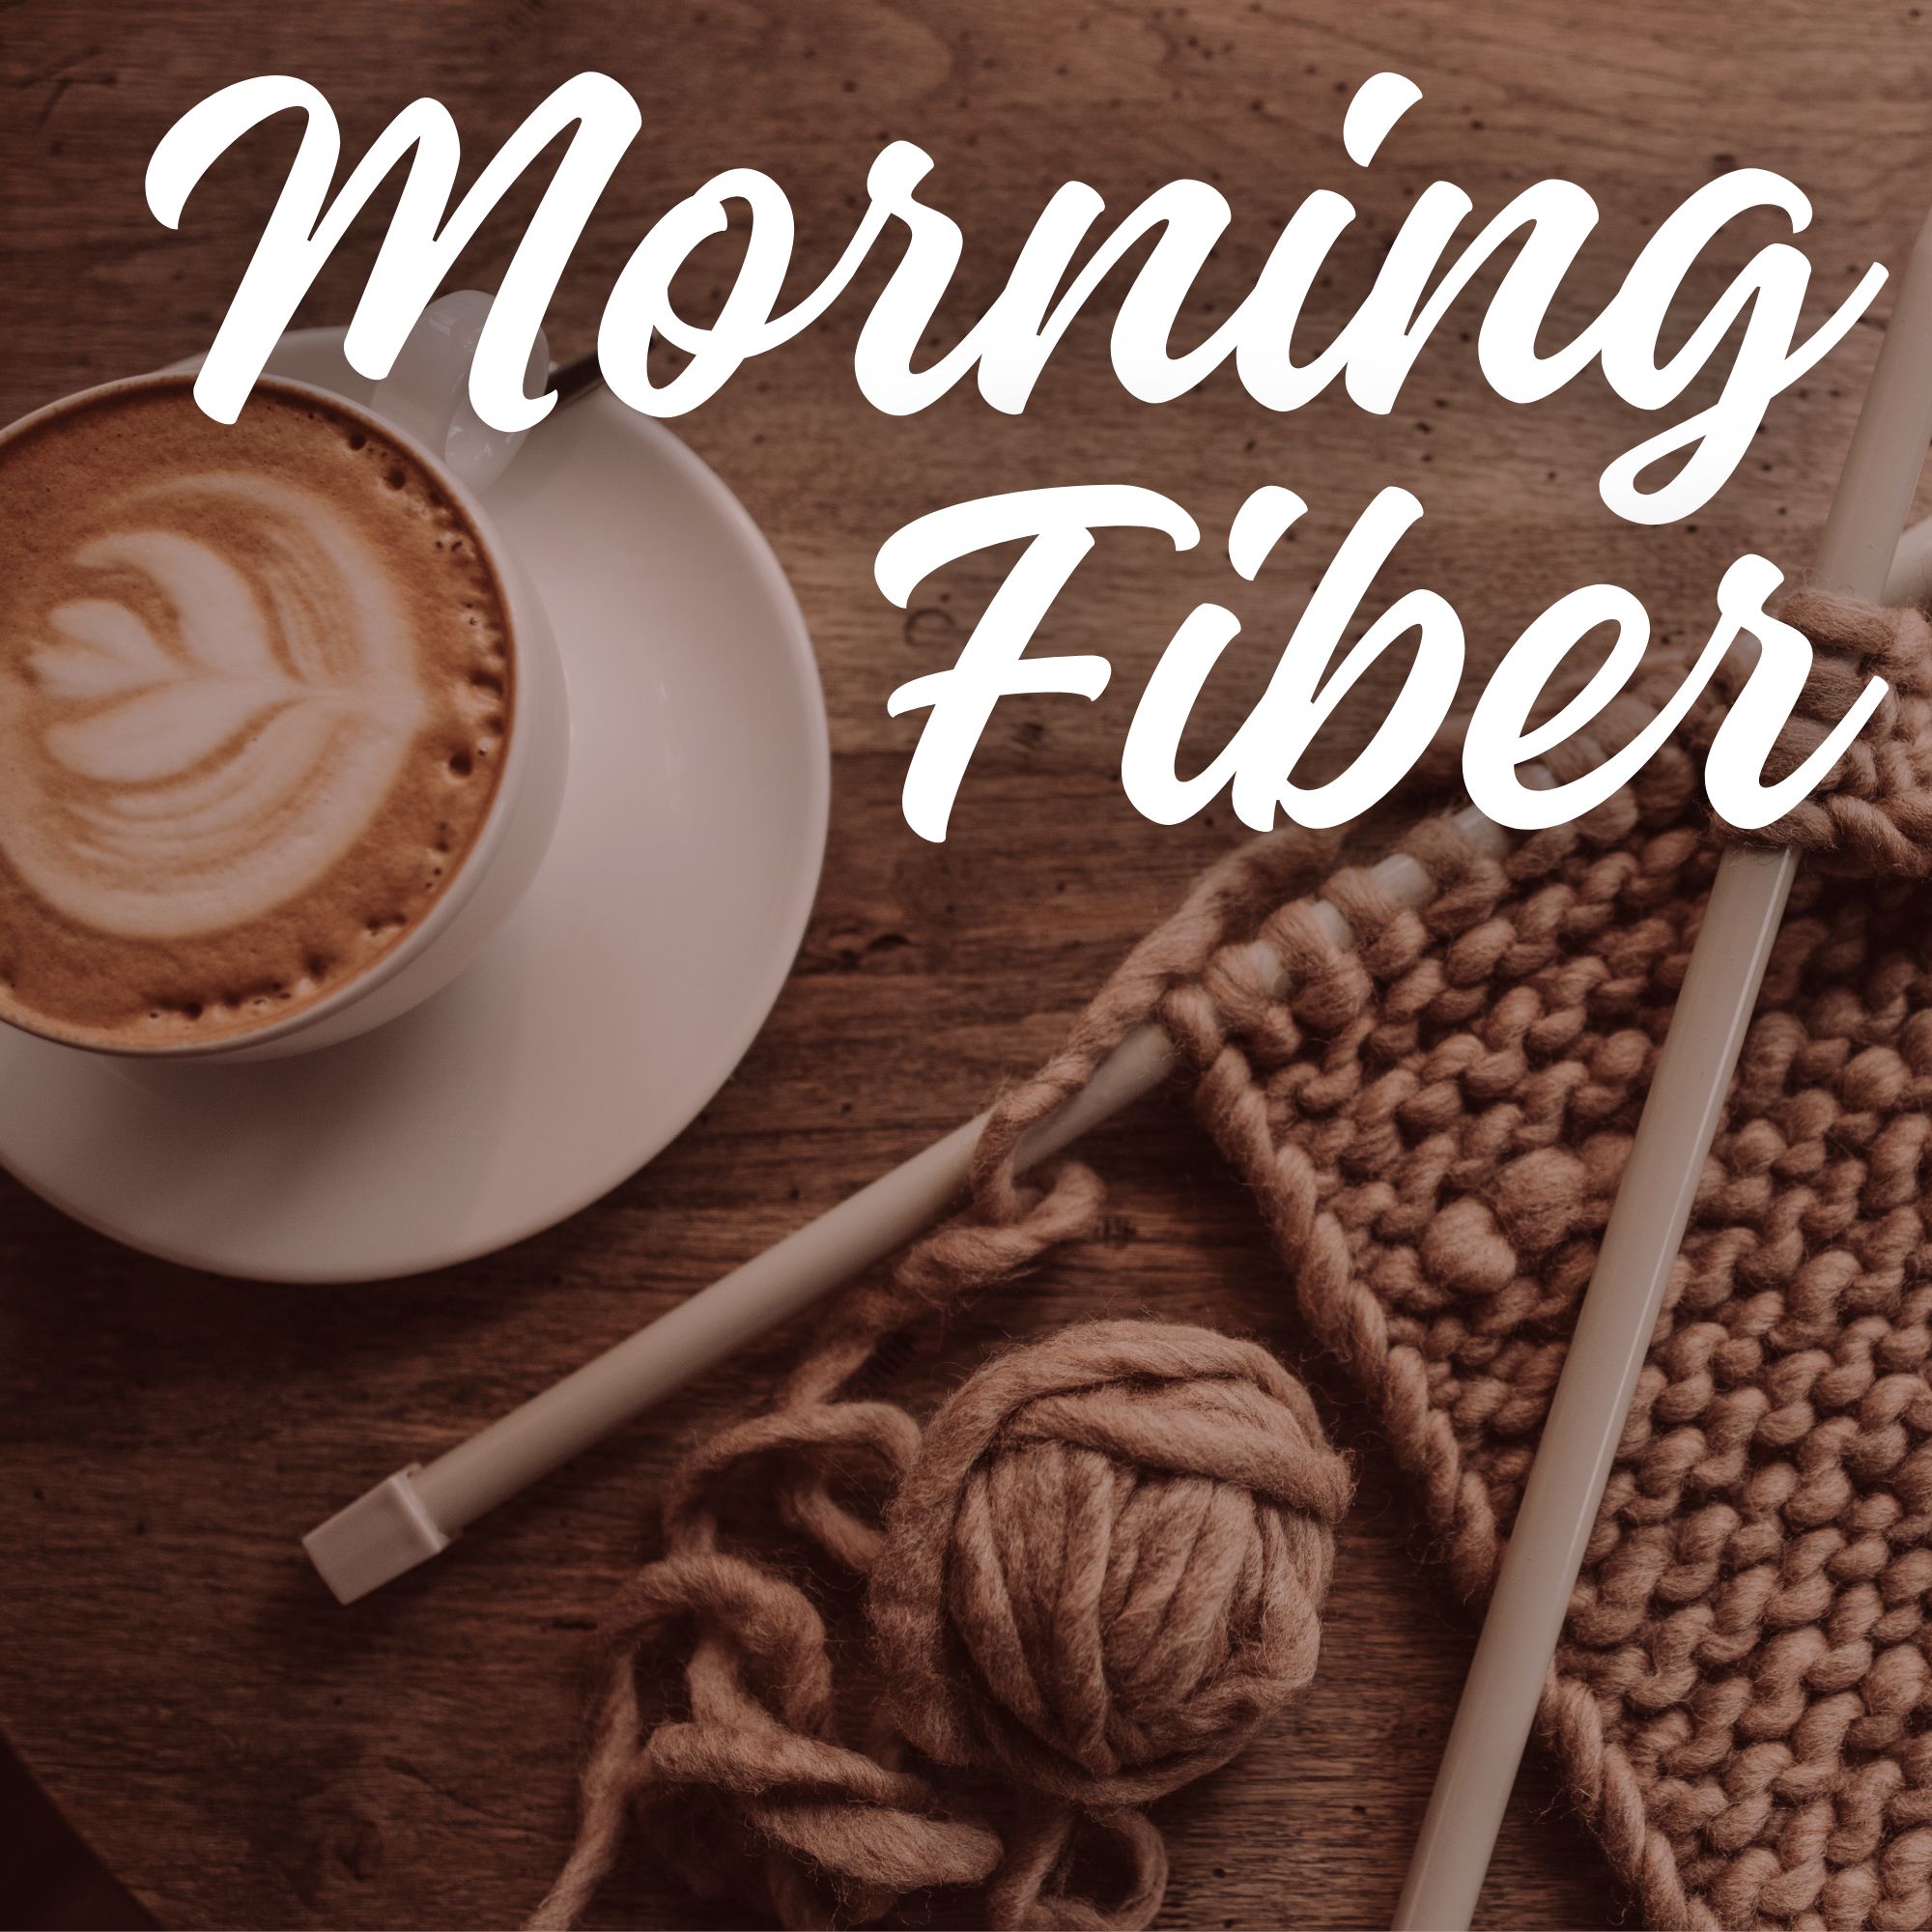 an image of a coffee cup next to a pair of knitting needles and yarn. The words "Morning Fiber" appear in front of the image. 